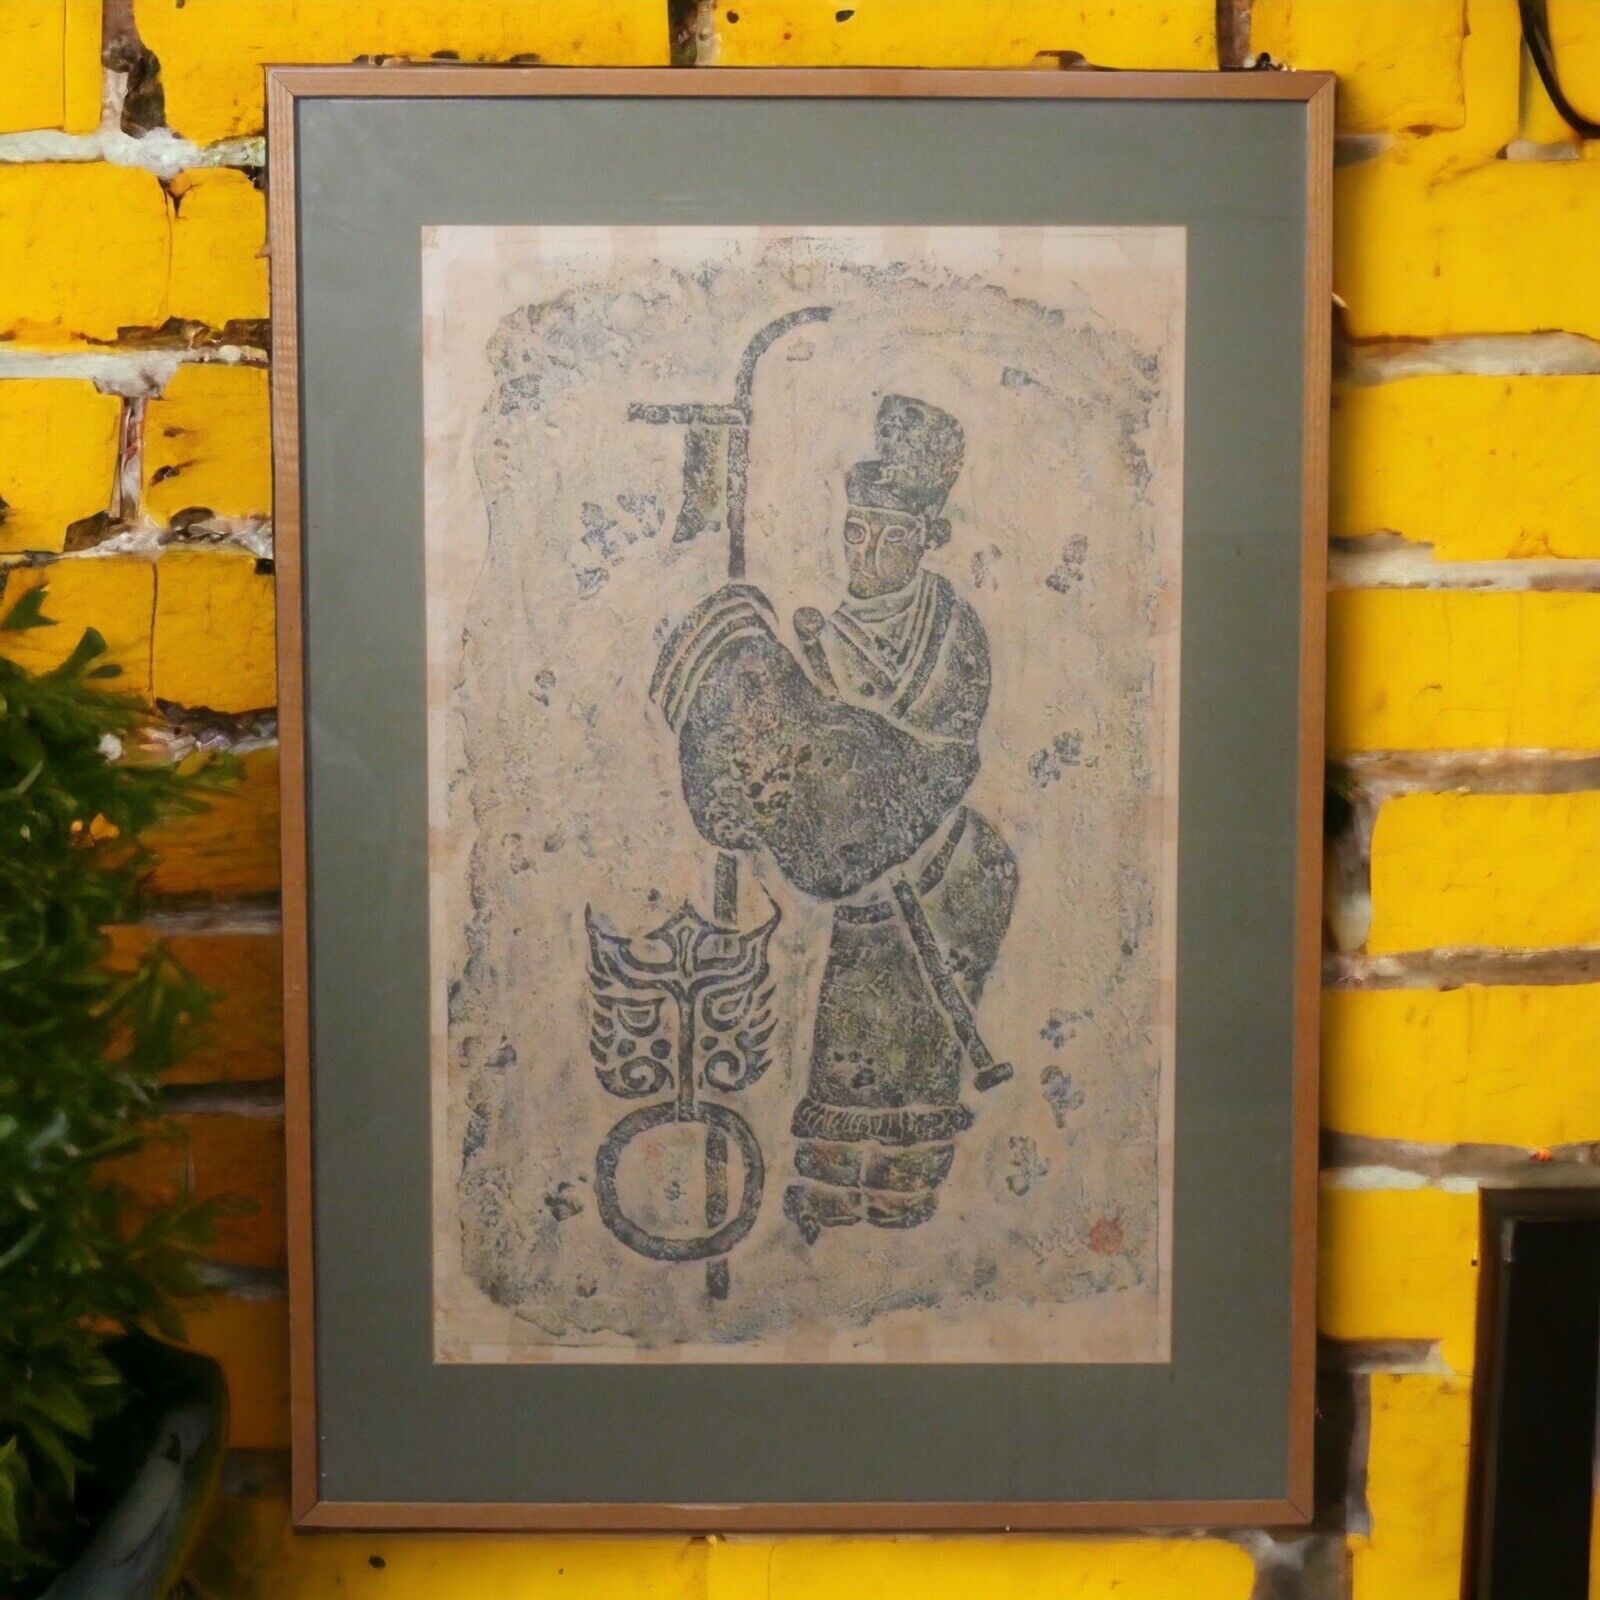 Mid 20th Century Thai Holy Man in Robe Framed Charcoal Rubbing Art